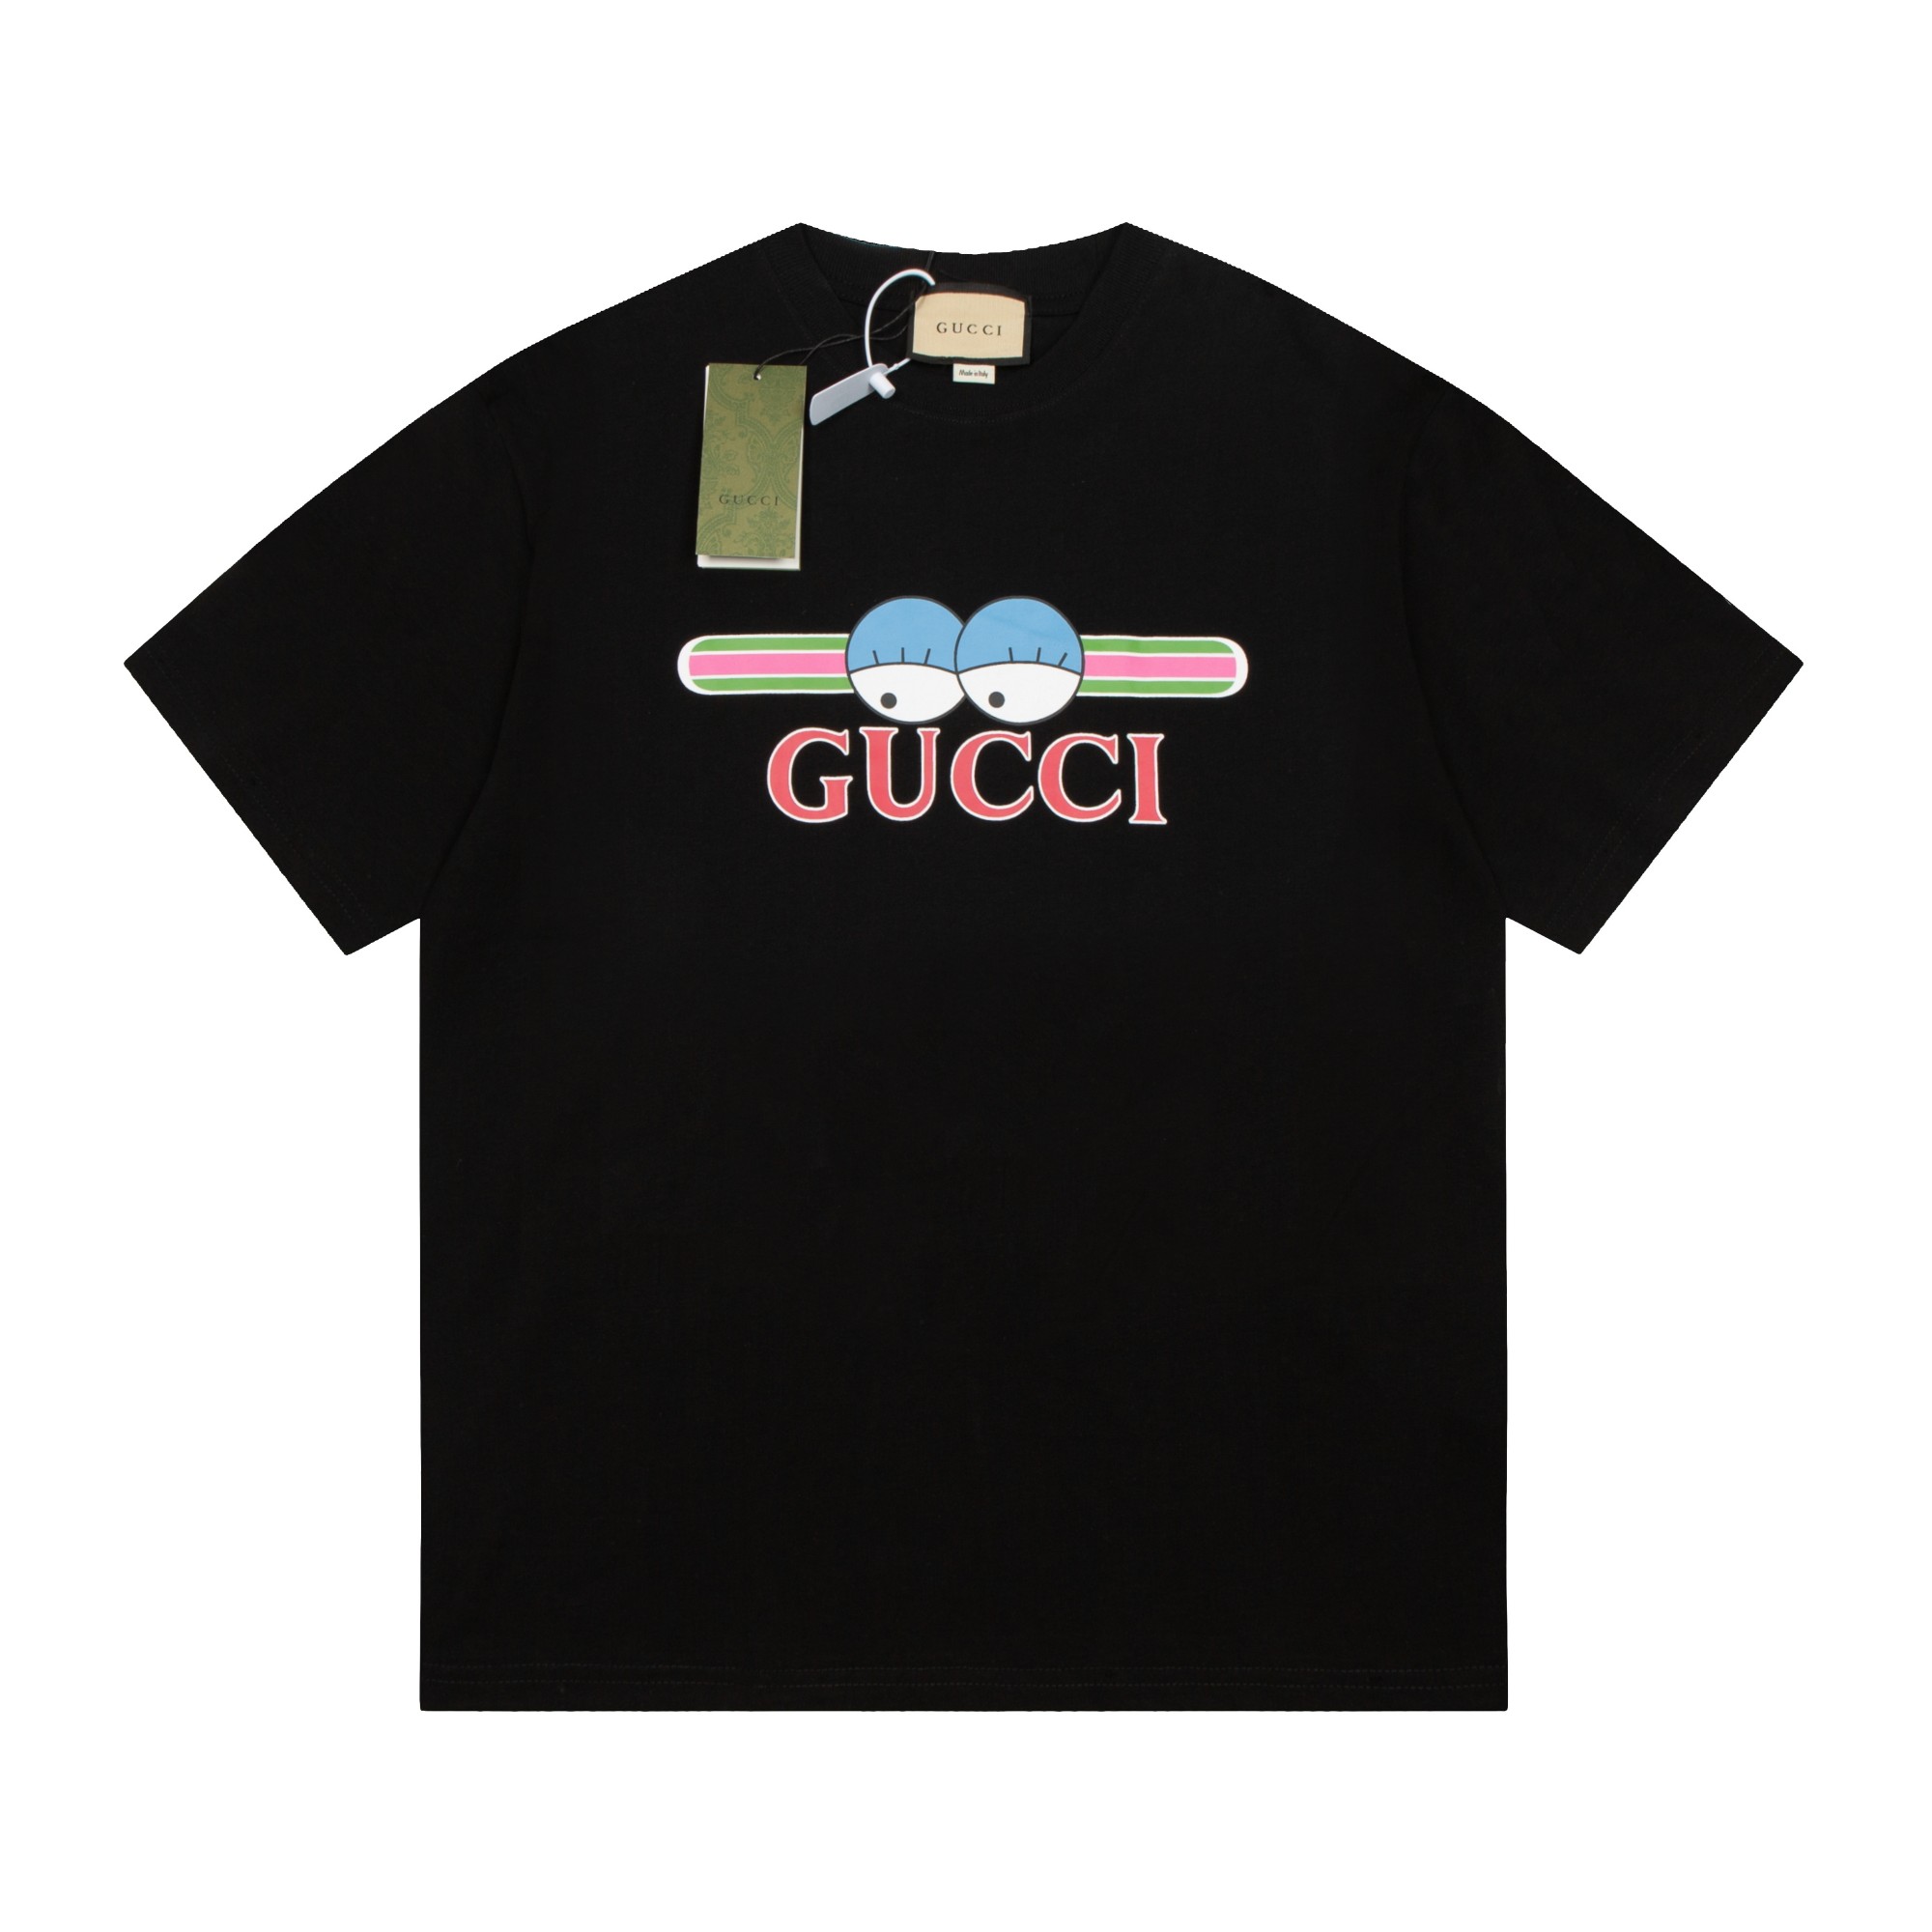 Gucci Clothing T-Shirt Printing Unisex Cotton Spring/Summer Collection Short Sleeve